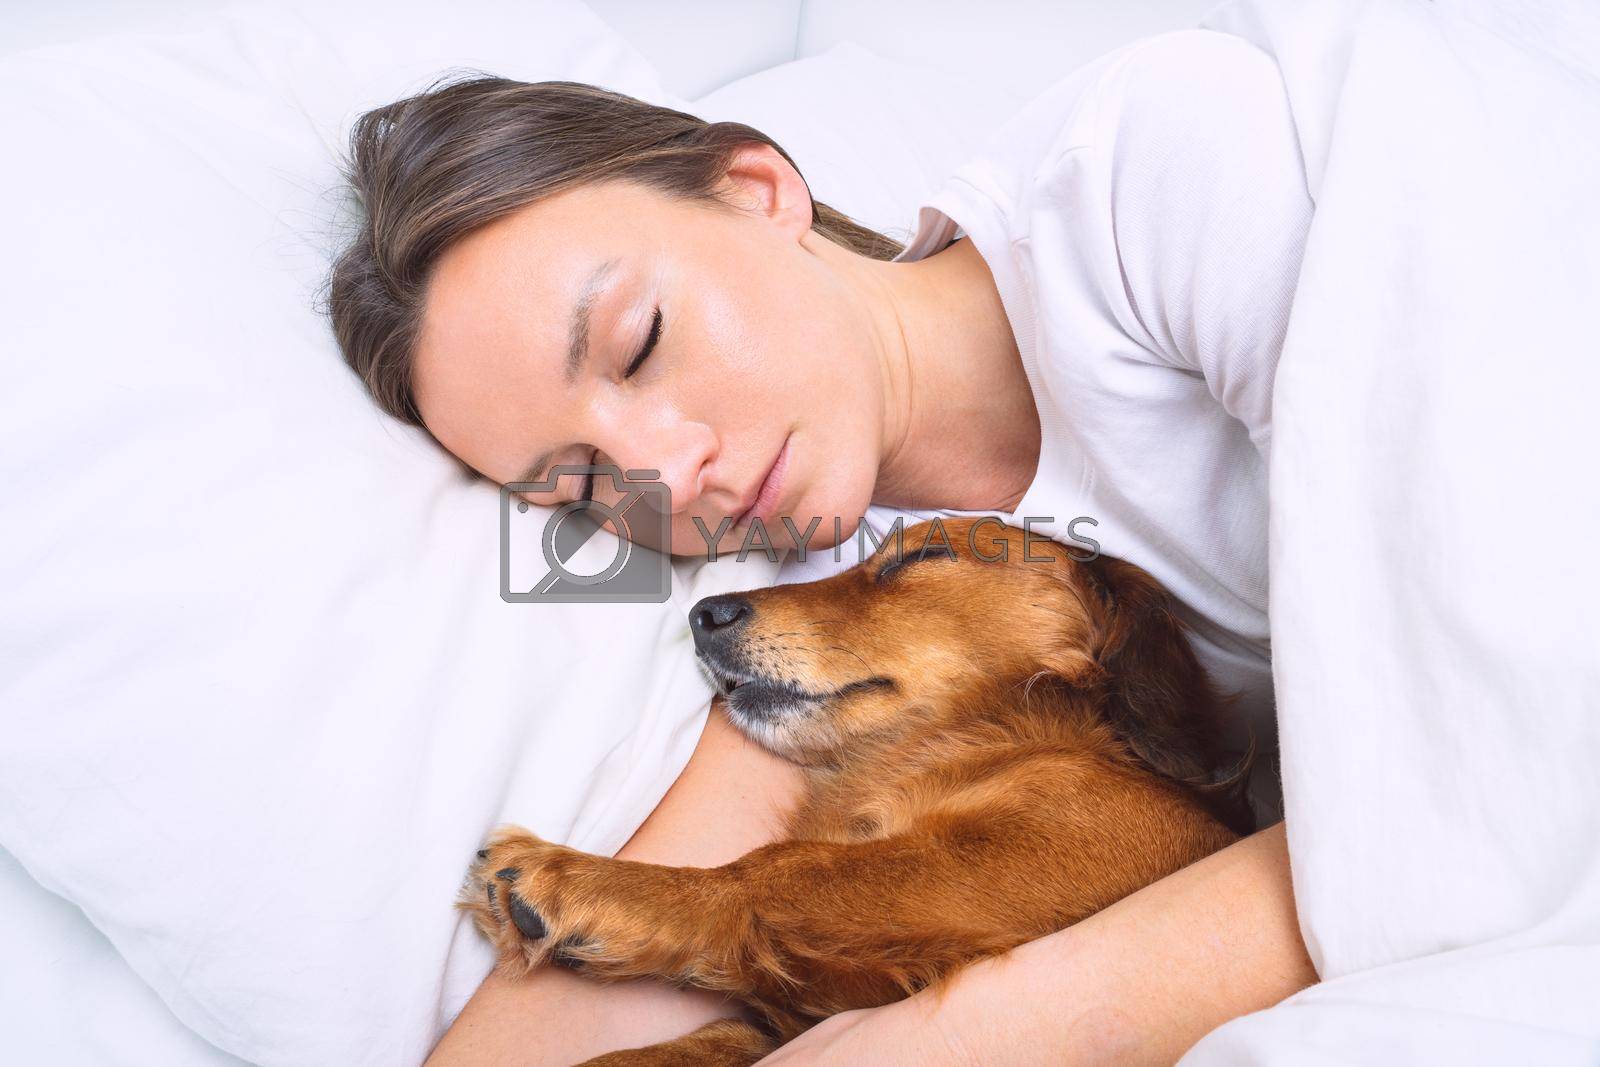 Royalty free image of Woman sleeping with dog in the bed. Lovely dachshund dog sleeping together with owner by DariaKulkova